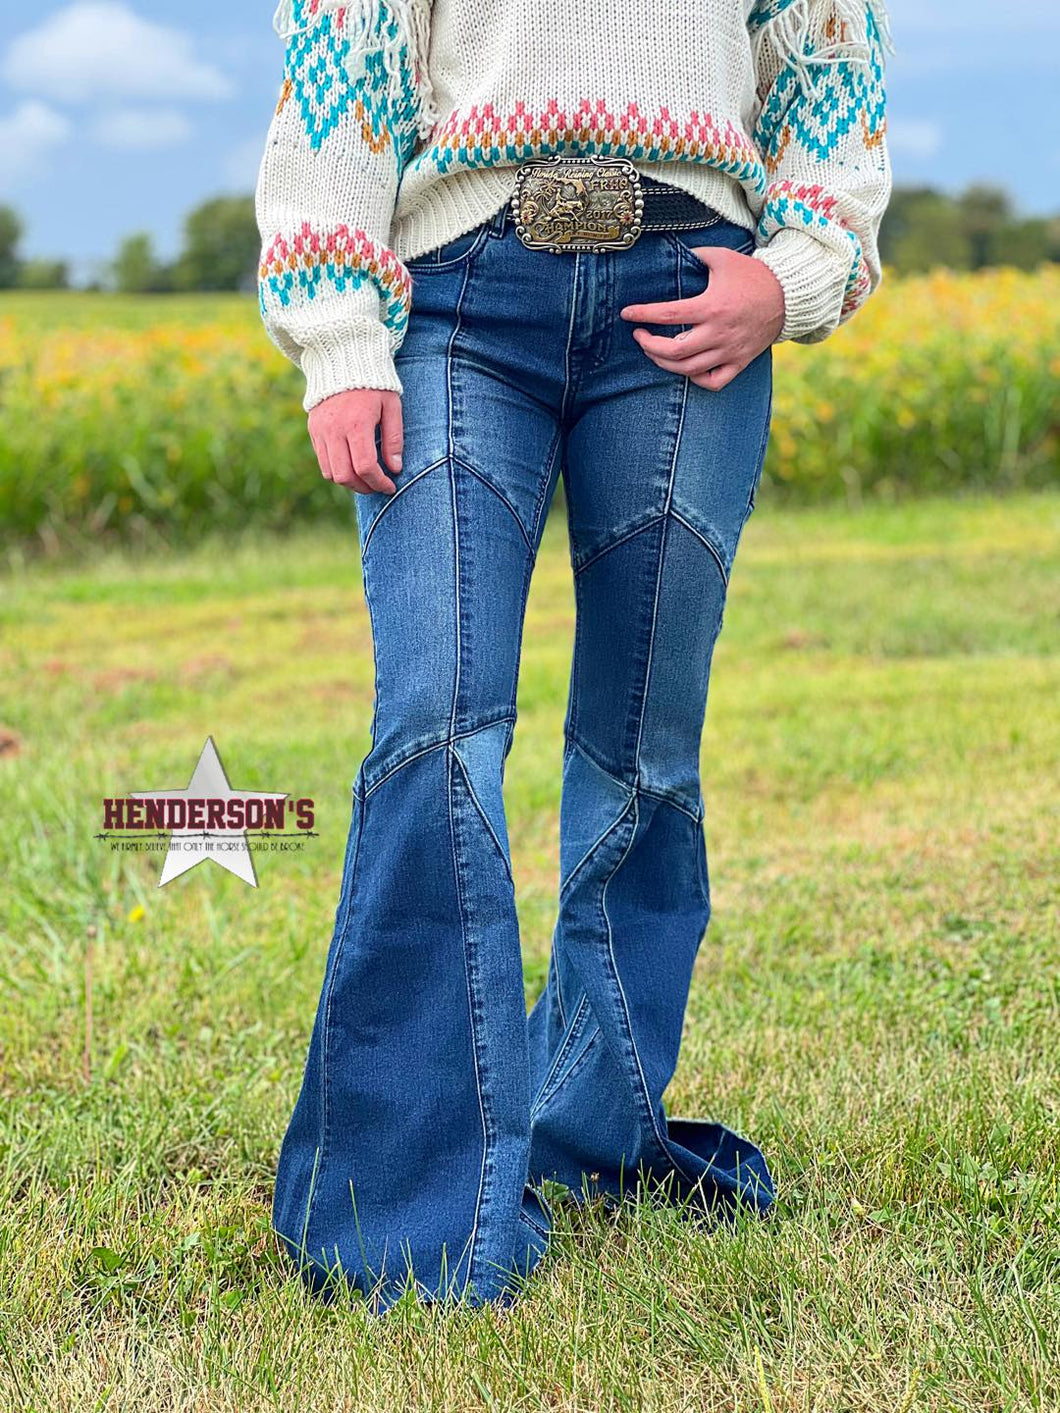 Share more than 223 bell bottom western jeans super hot